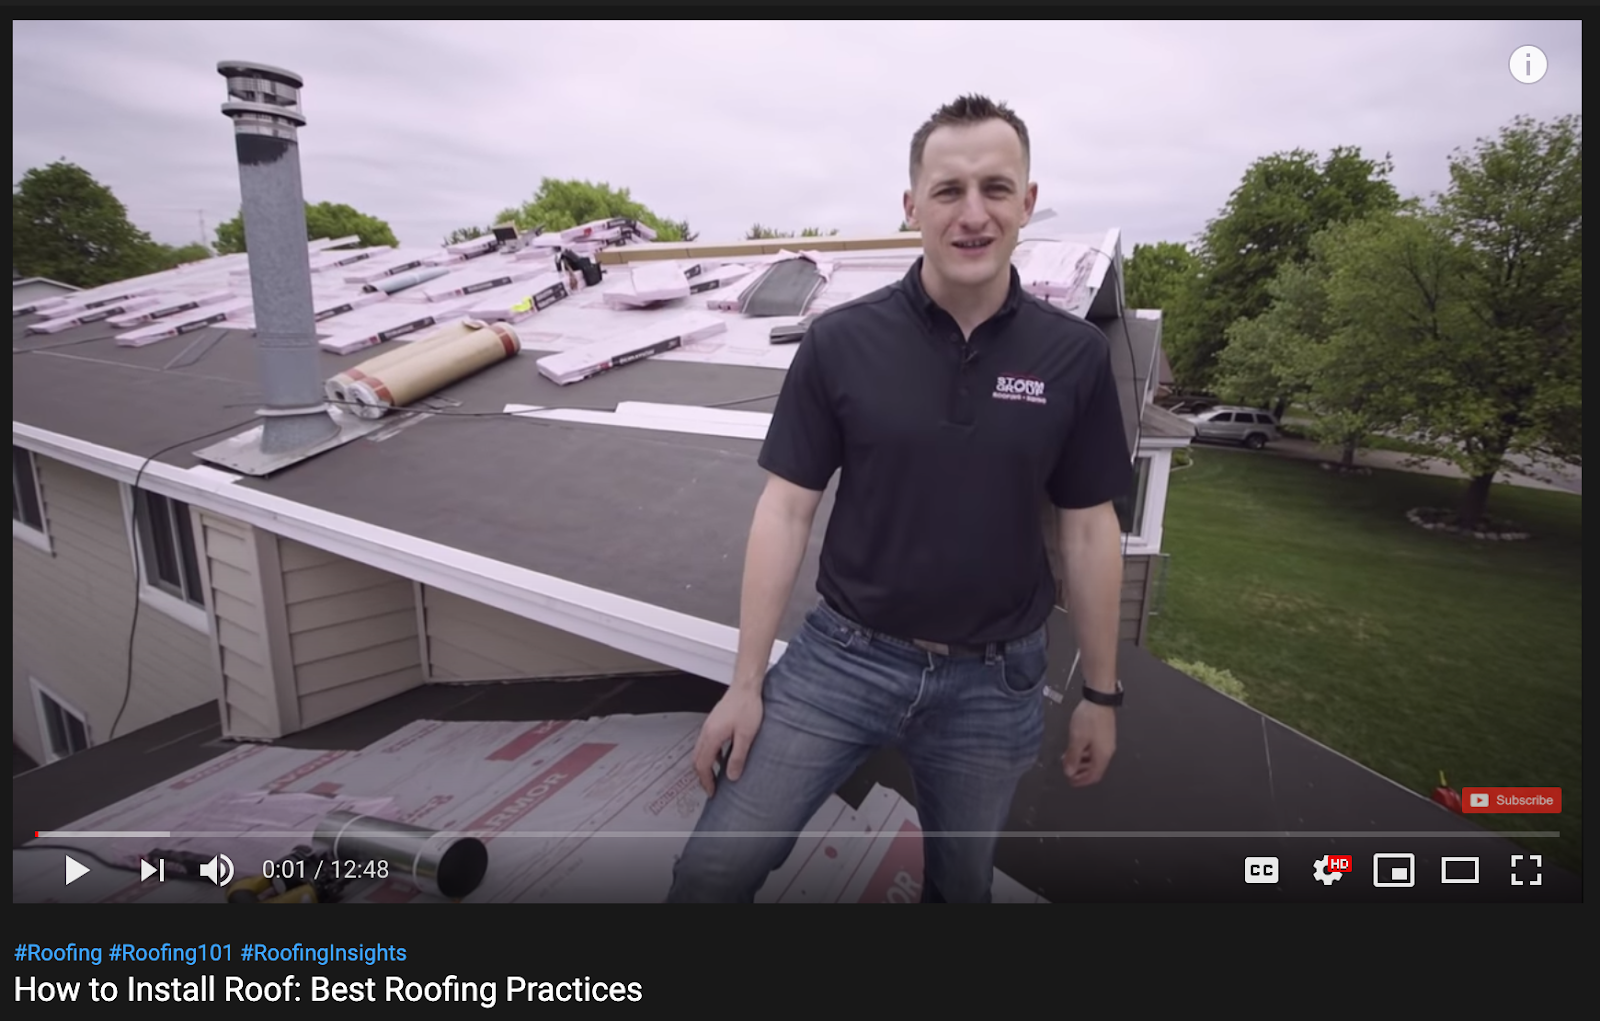 Brand awareness example from Roofing Insights